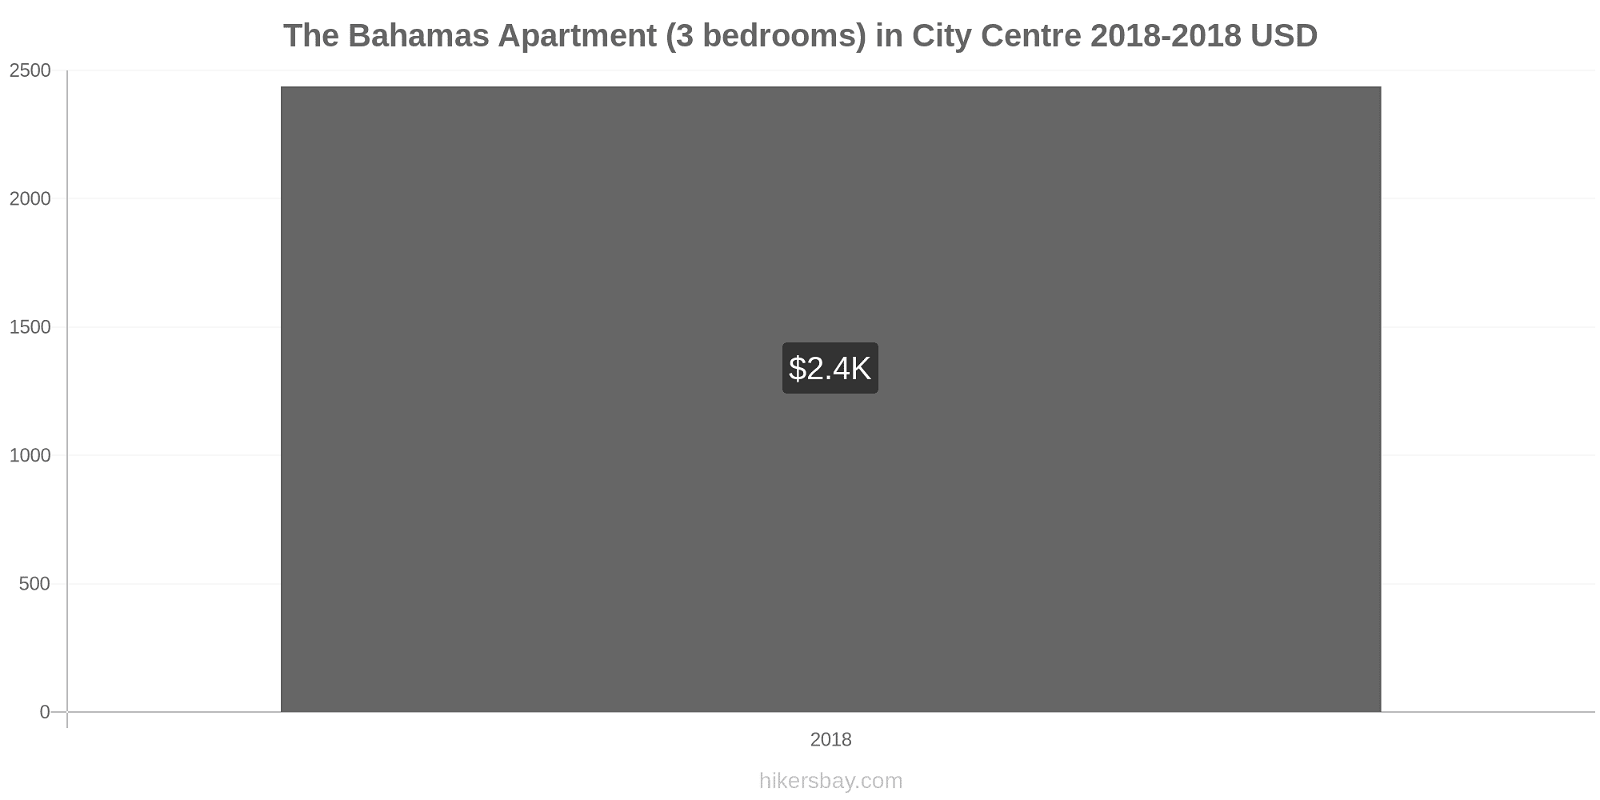 The Bahamas price changes Apartment (3 bedrooms) in City Centre hikersbay.com